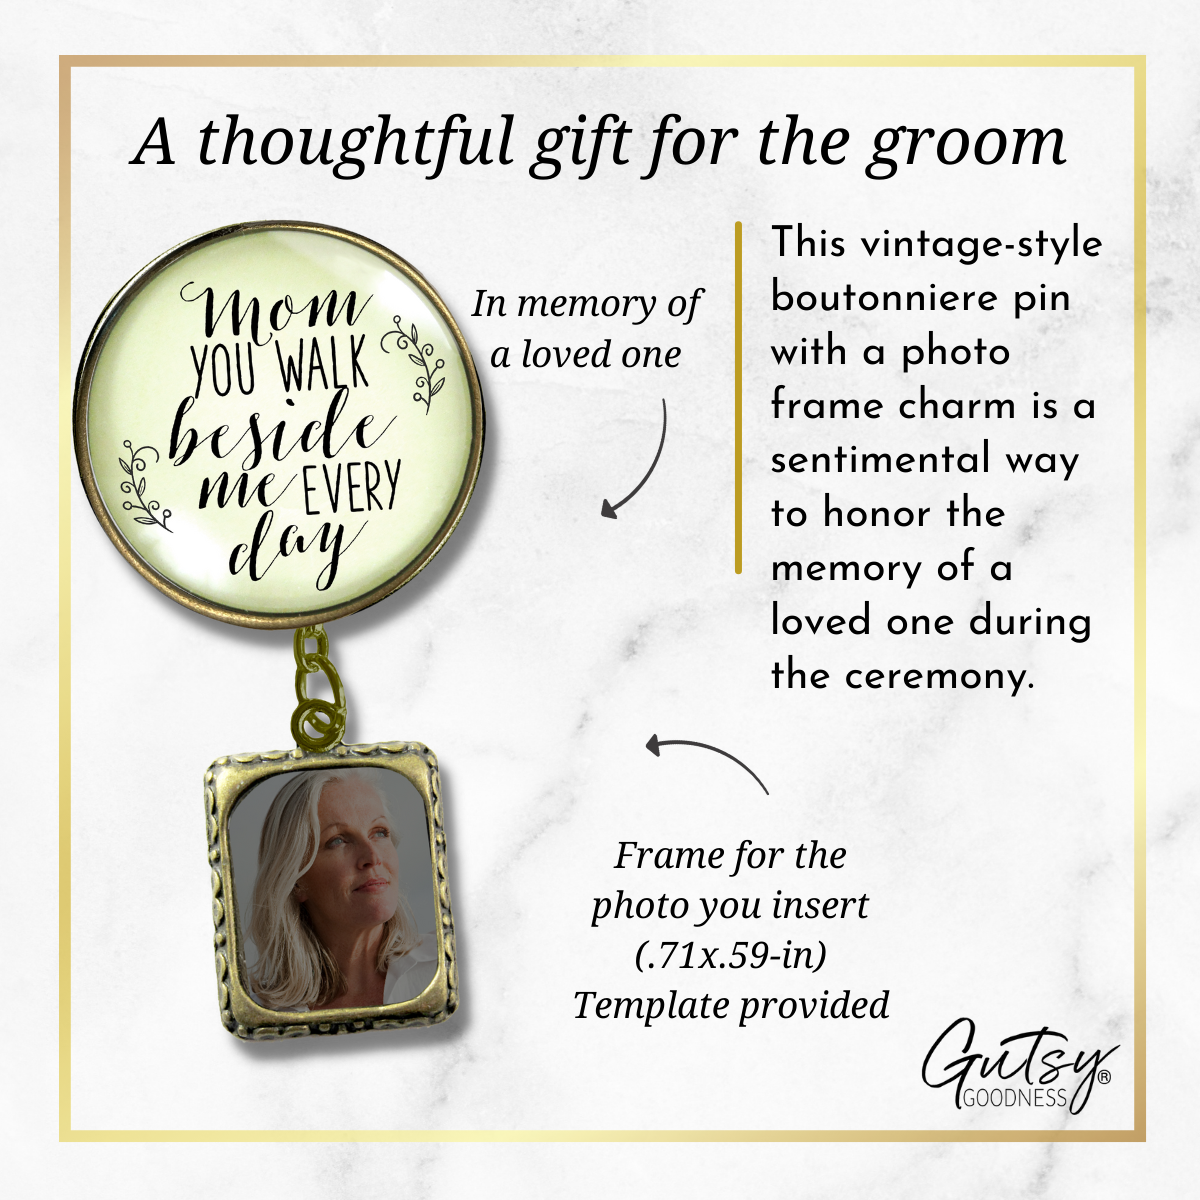 Wedding Memorial Boutonniere Pin Photo Frame Honor Mom Vintage Cream For Men - Gutsy Goodness